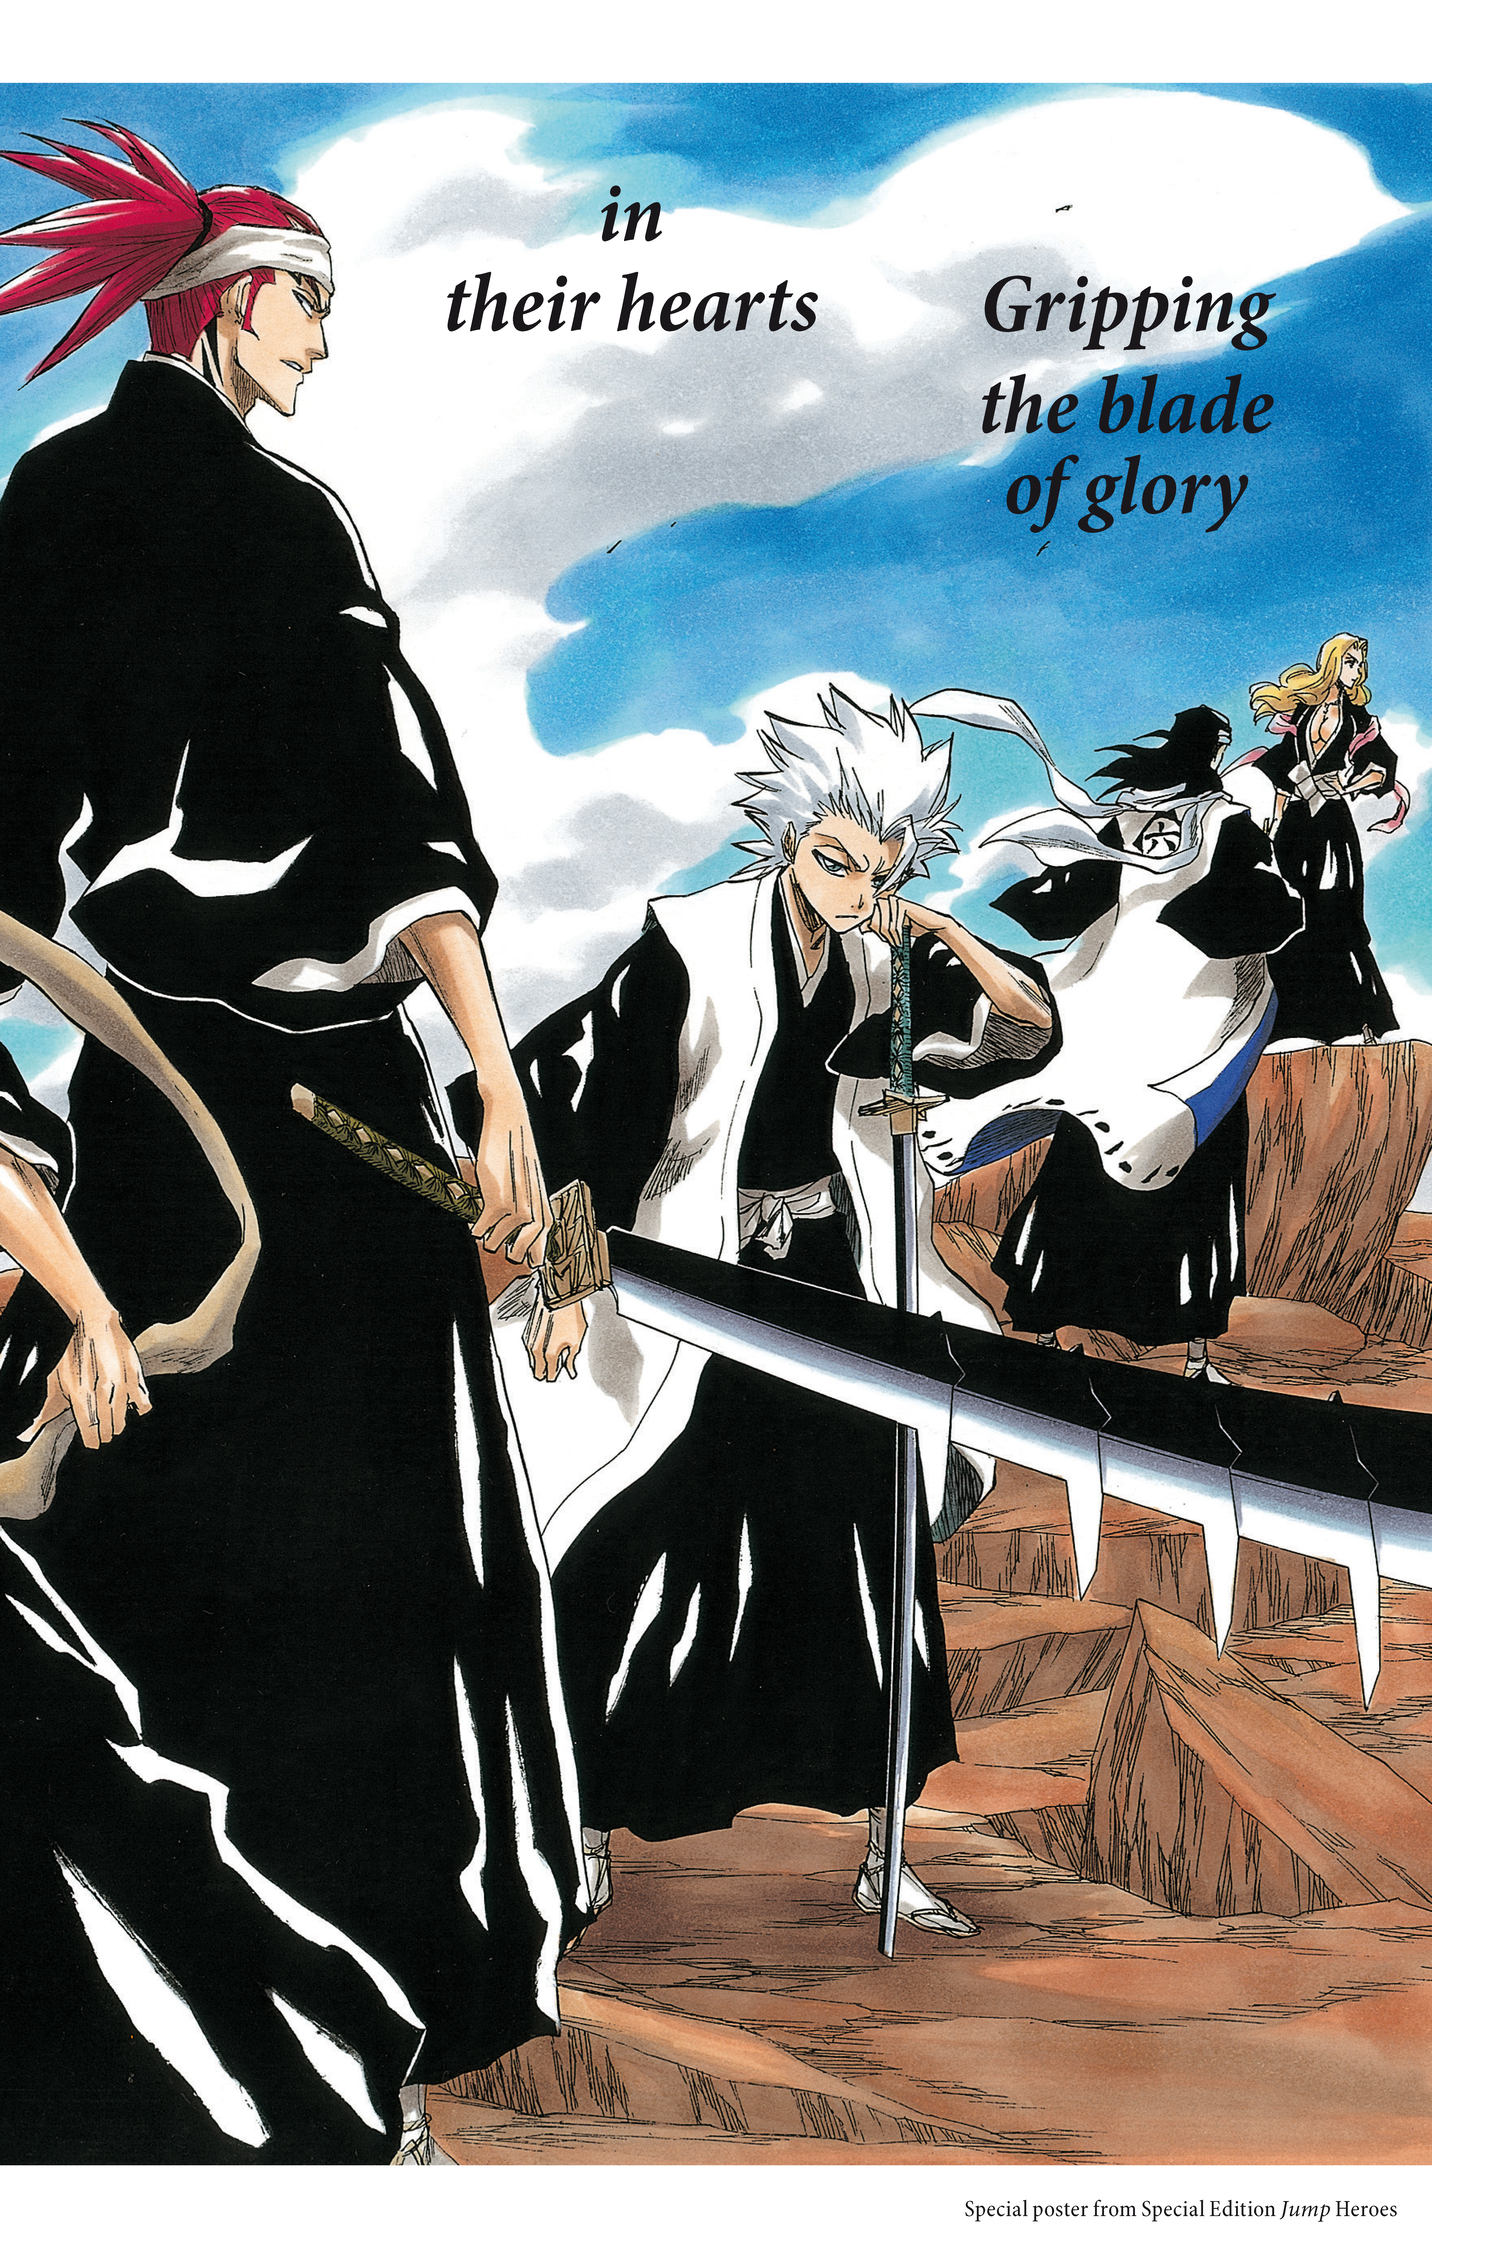 BLEACH Official Character Book 1: SOULs. image count 2